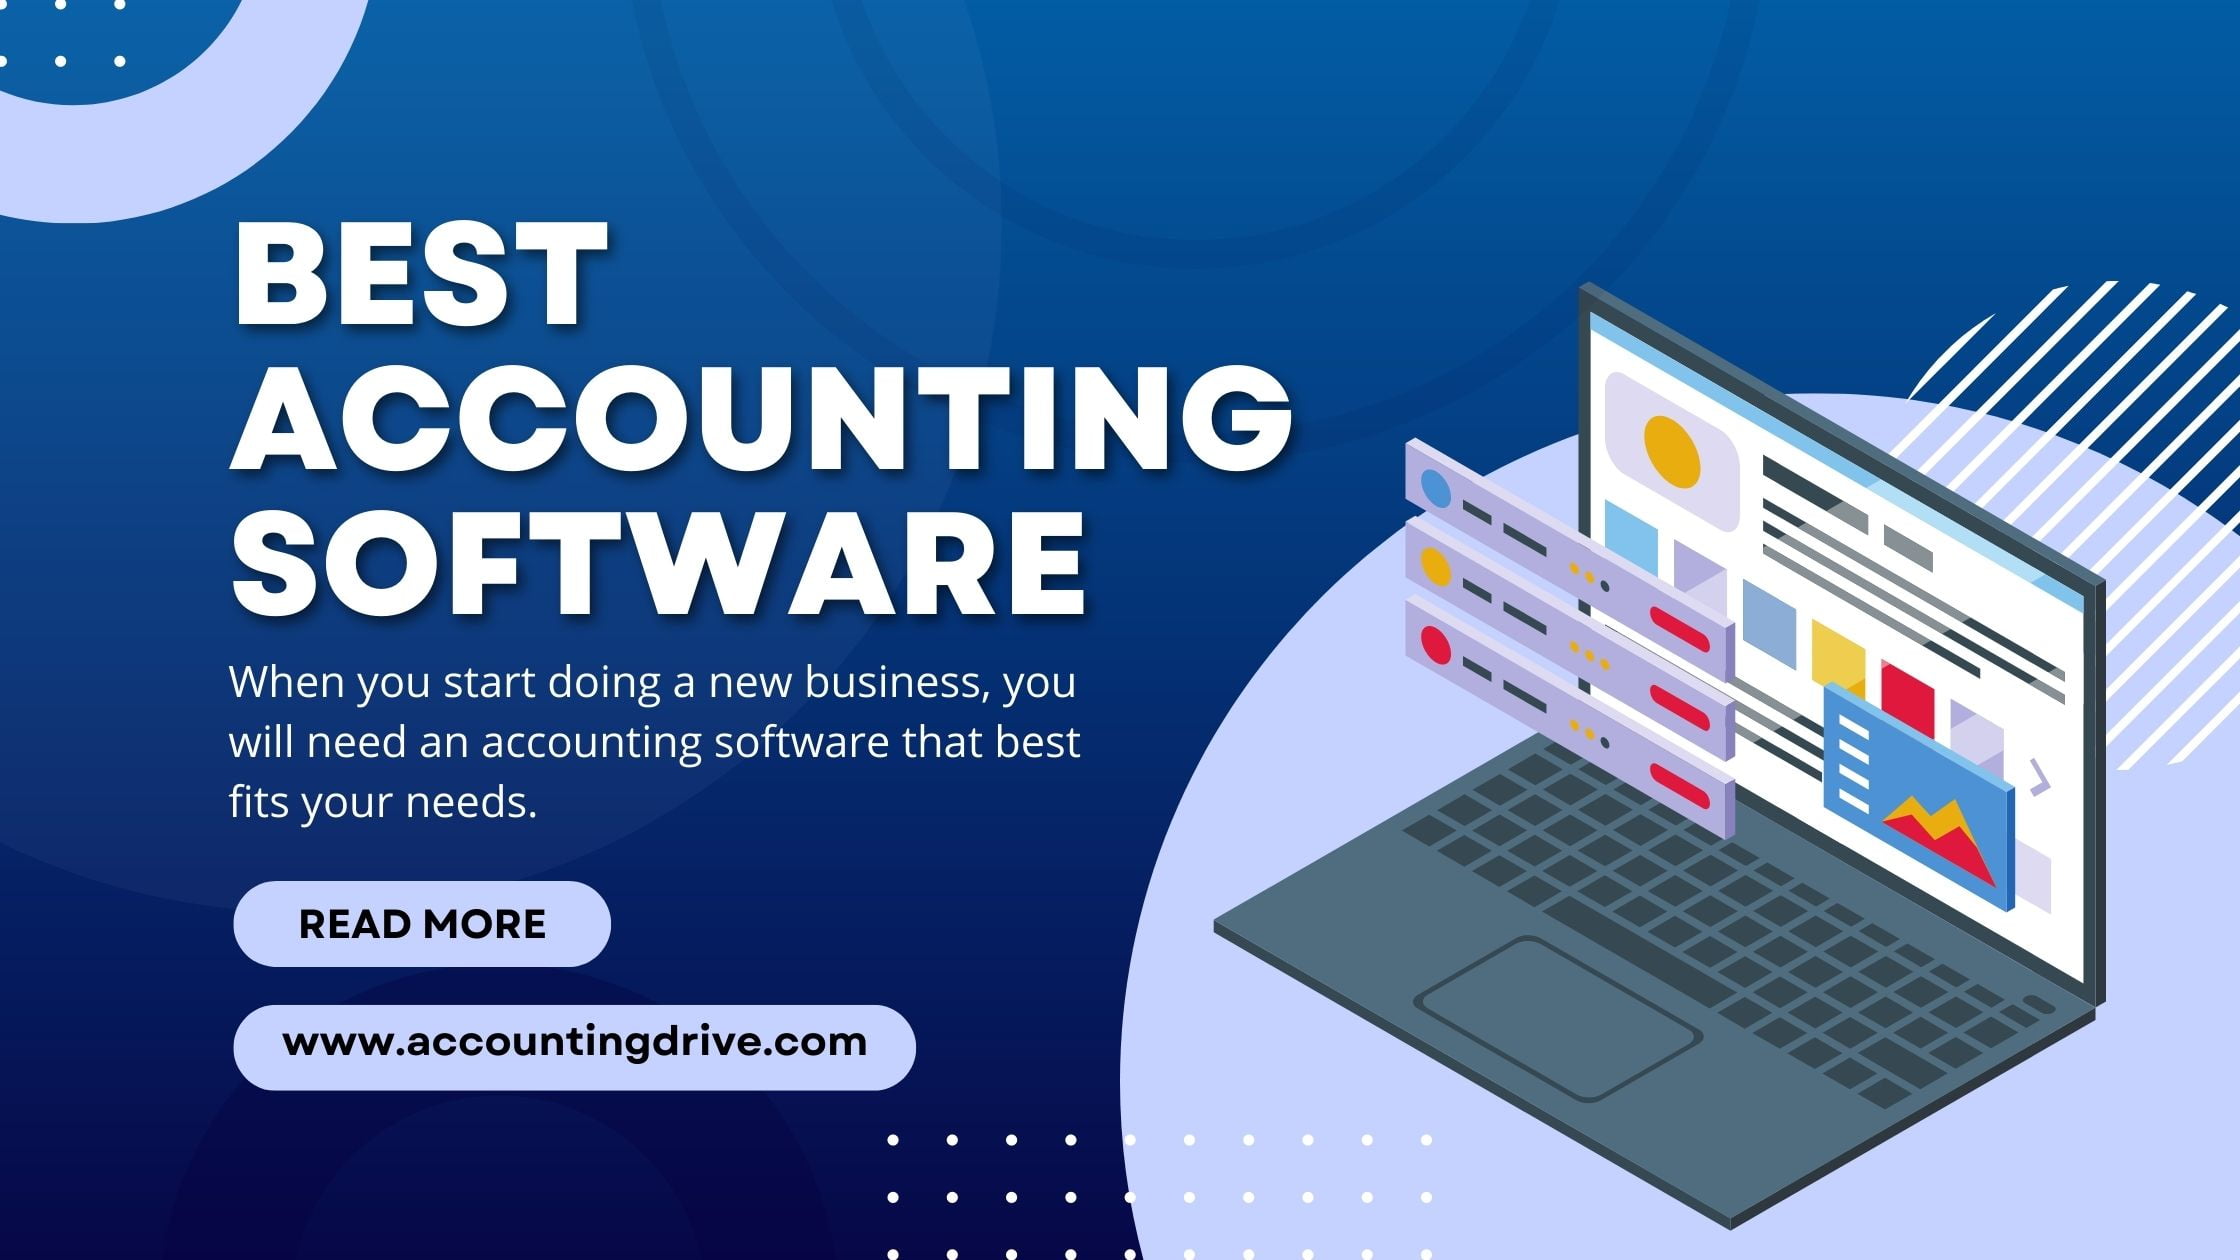 Best accounting software